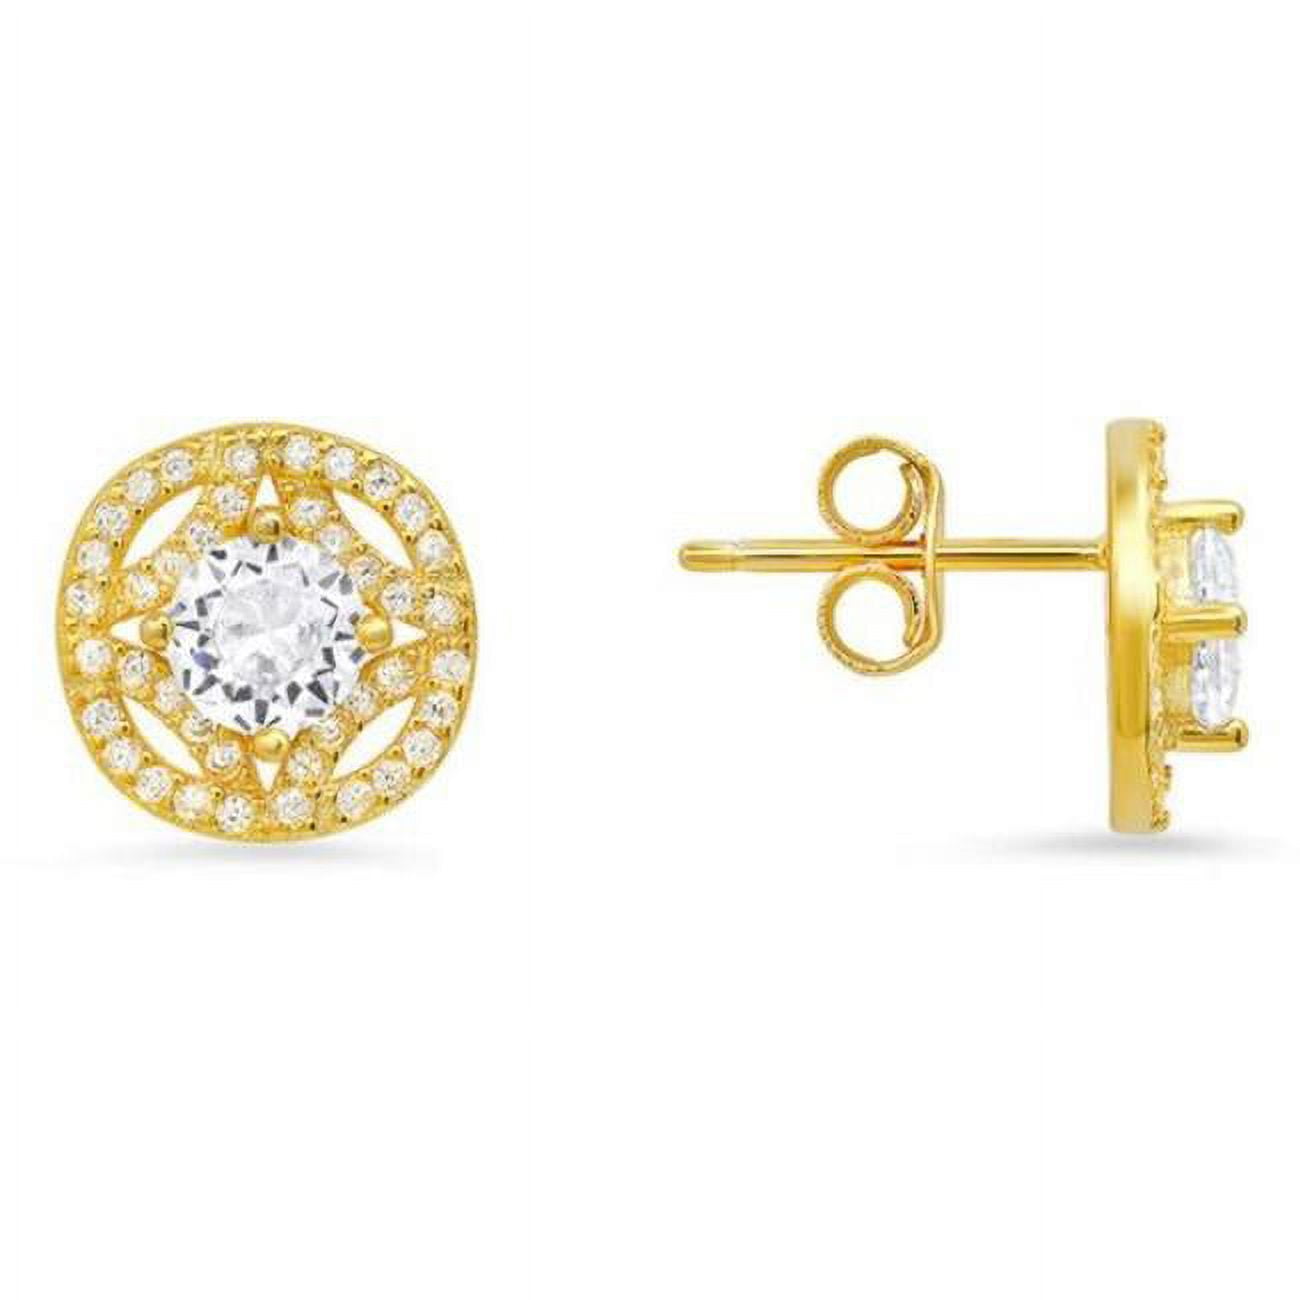 Picture of 212 Main 04-041Y-DSE Womens Yelow Gold Over Silver Vintage Halo Cubic Zirconia Stud Earrings